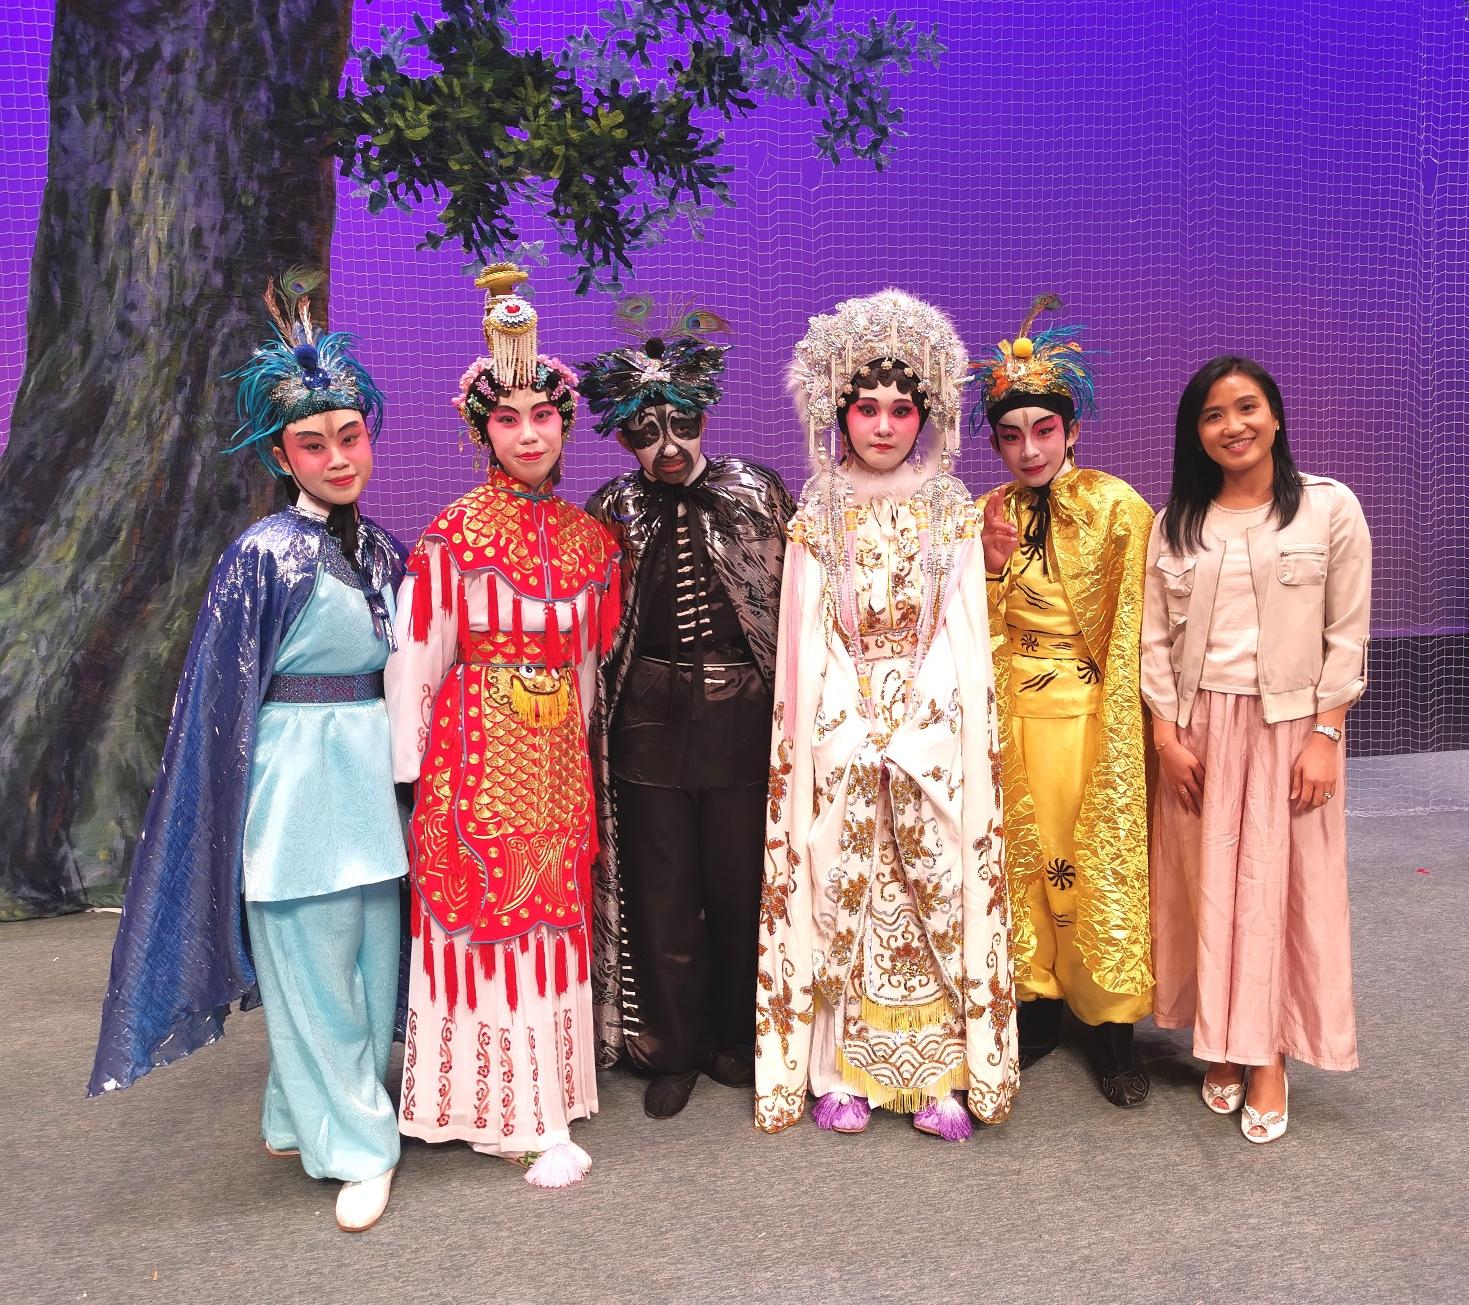 The Director of the Hong Kong Economic and Trade Office (Toronto), Ms Emily Mo (right), is pictured with the Cantonese opera starlets of the Starlight Chinese Opera Performing Arts Centre after the Cantonese opera performance at Flato Markham Theatre, Markham, Canada, on July 24 (Toronto time).